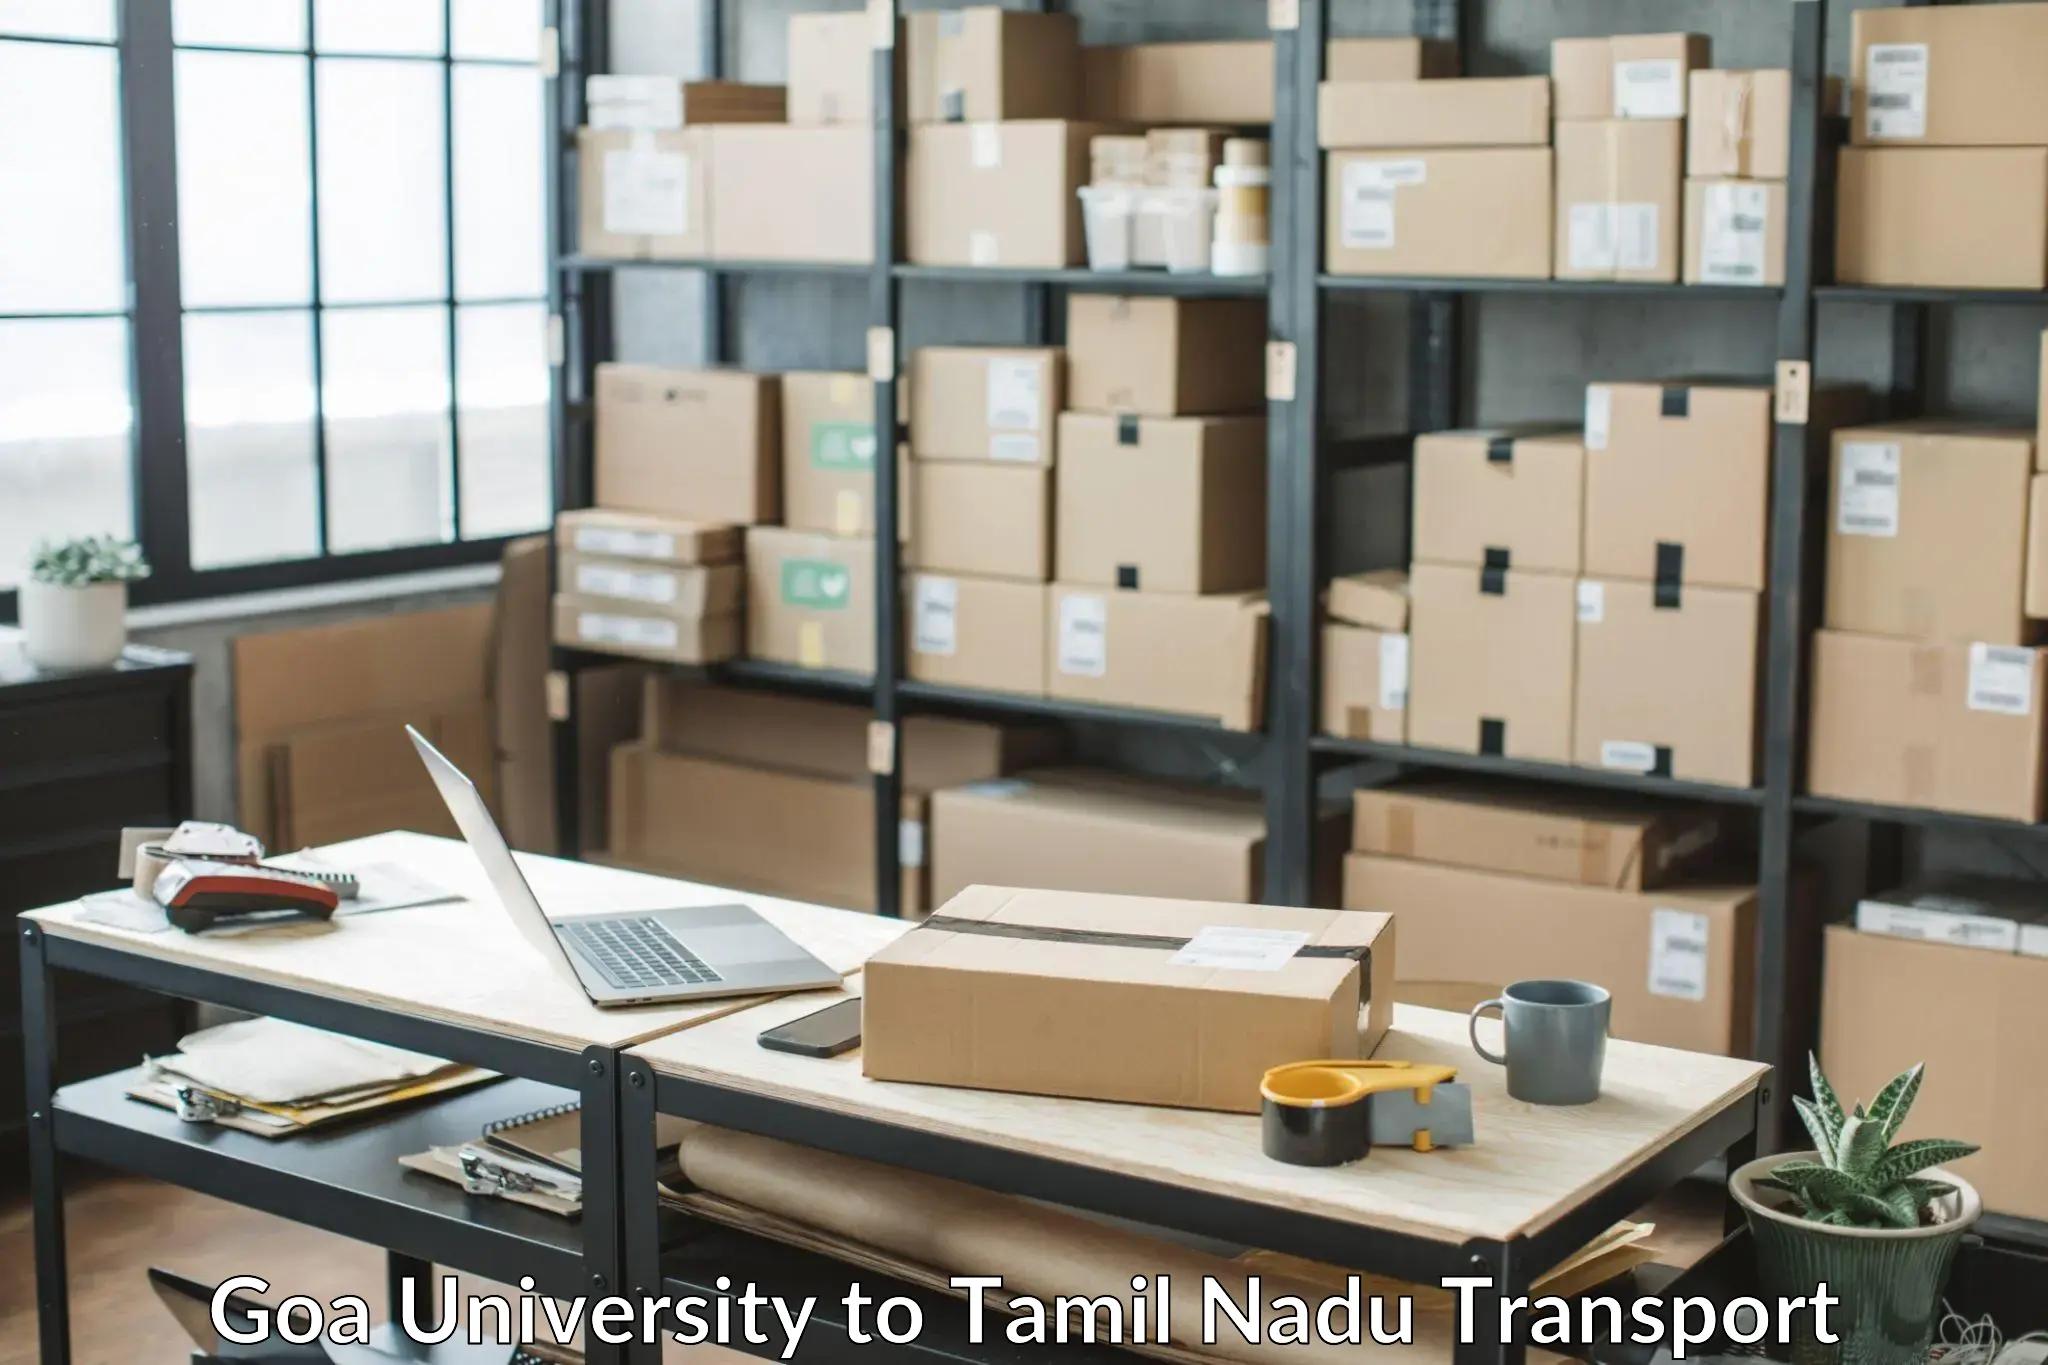 Goods delivery service Goa University to Thisayanvilai